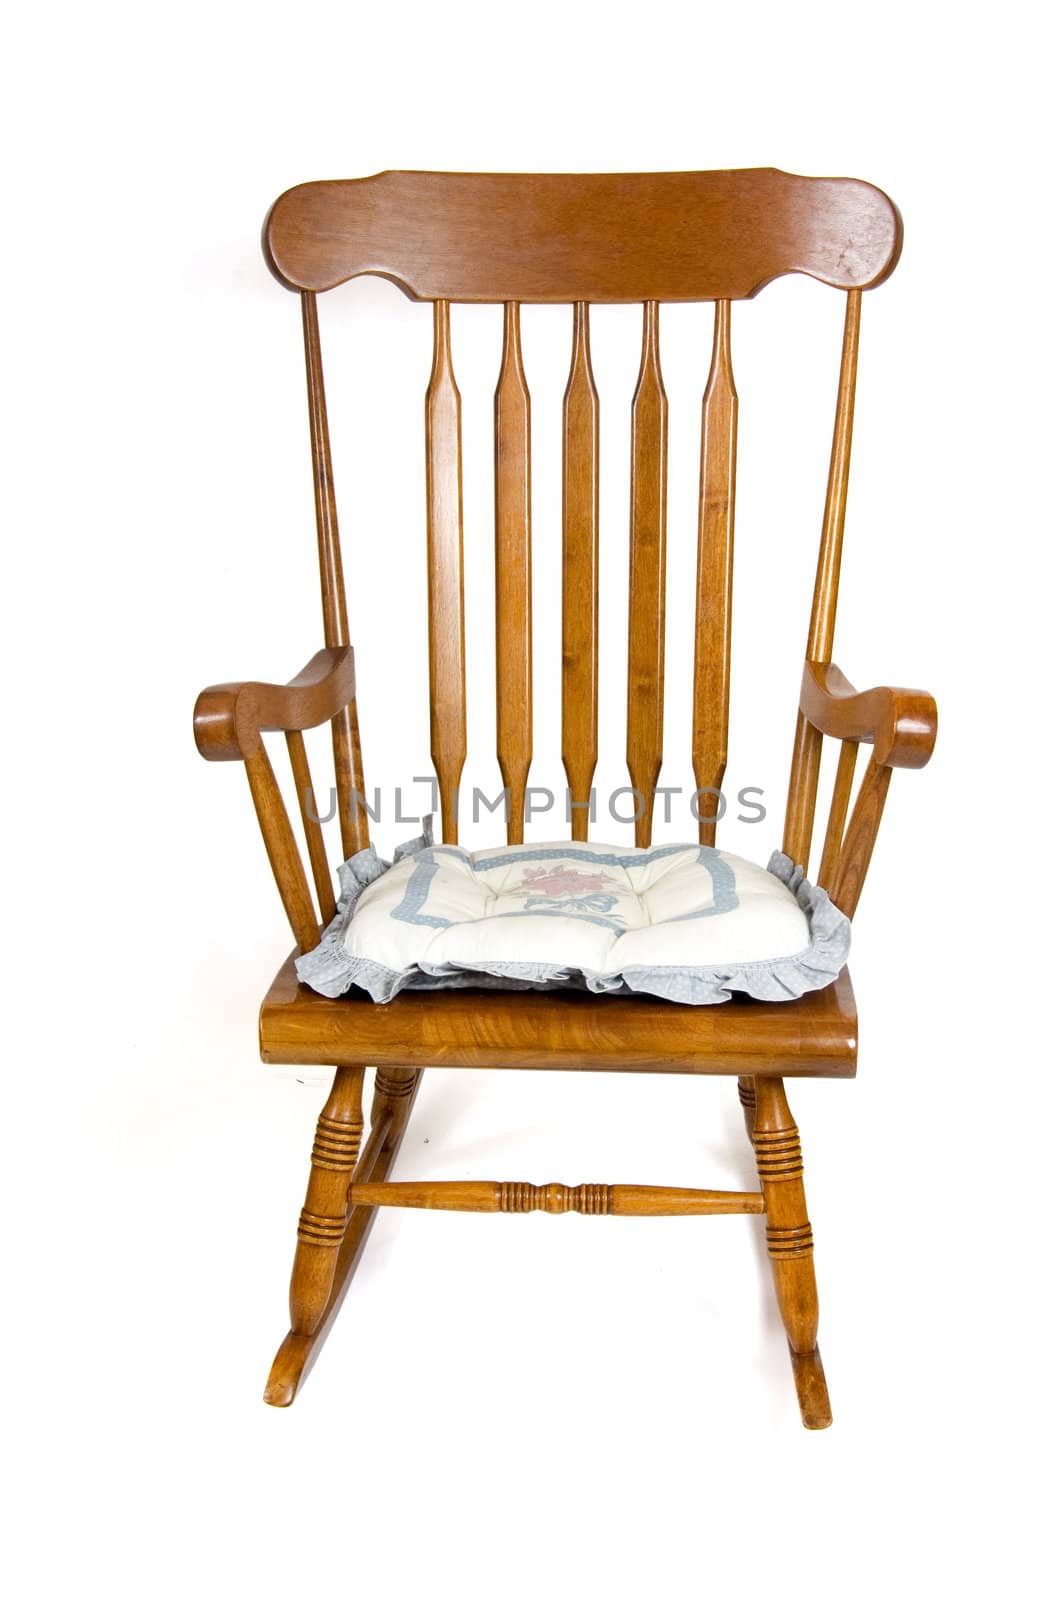 brown rocking chair isolated on white by ladyminnie